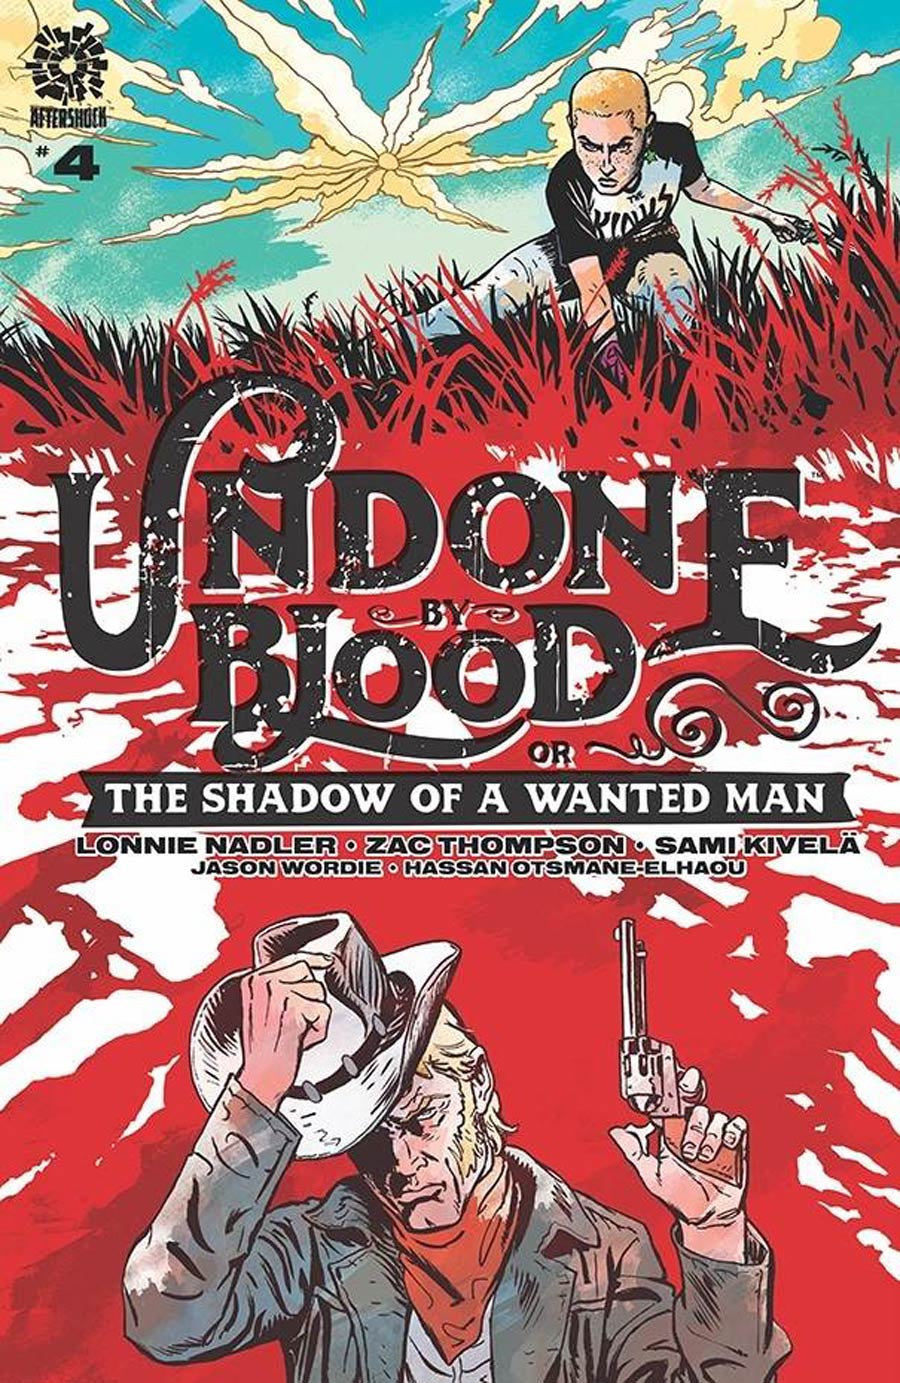 Undone By Blood Or The Shadow Of A Wanted Man #4